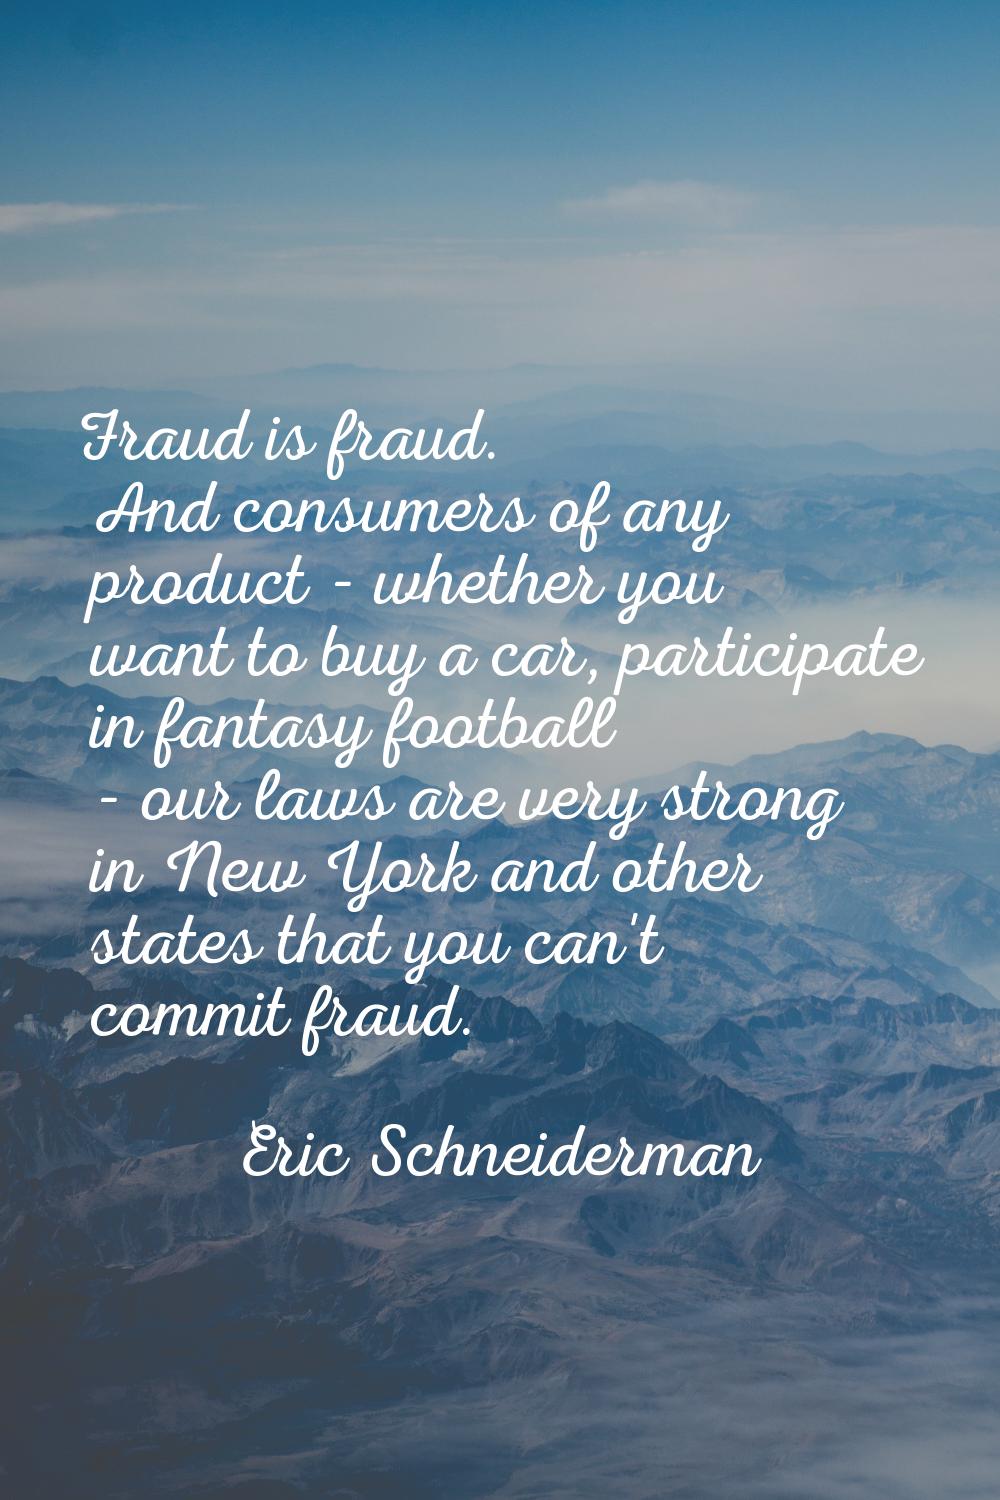 Fraud is fraud. And consumers of any product - whether you want to buy a car, participate in fantas